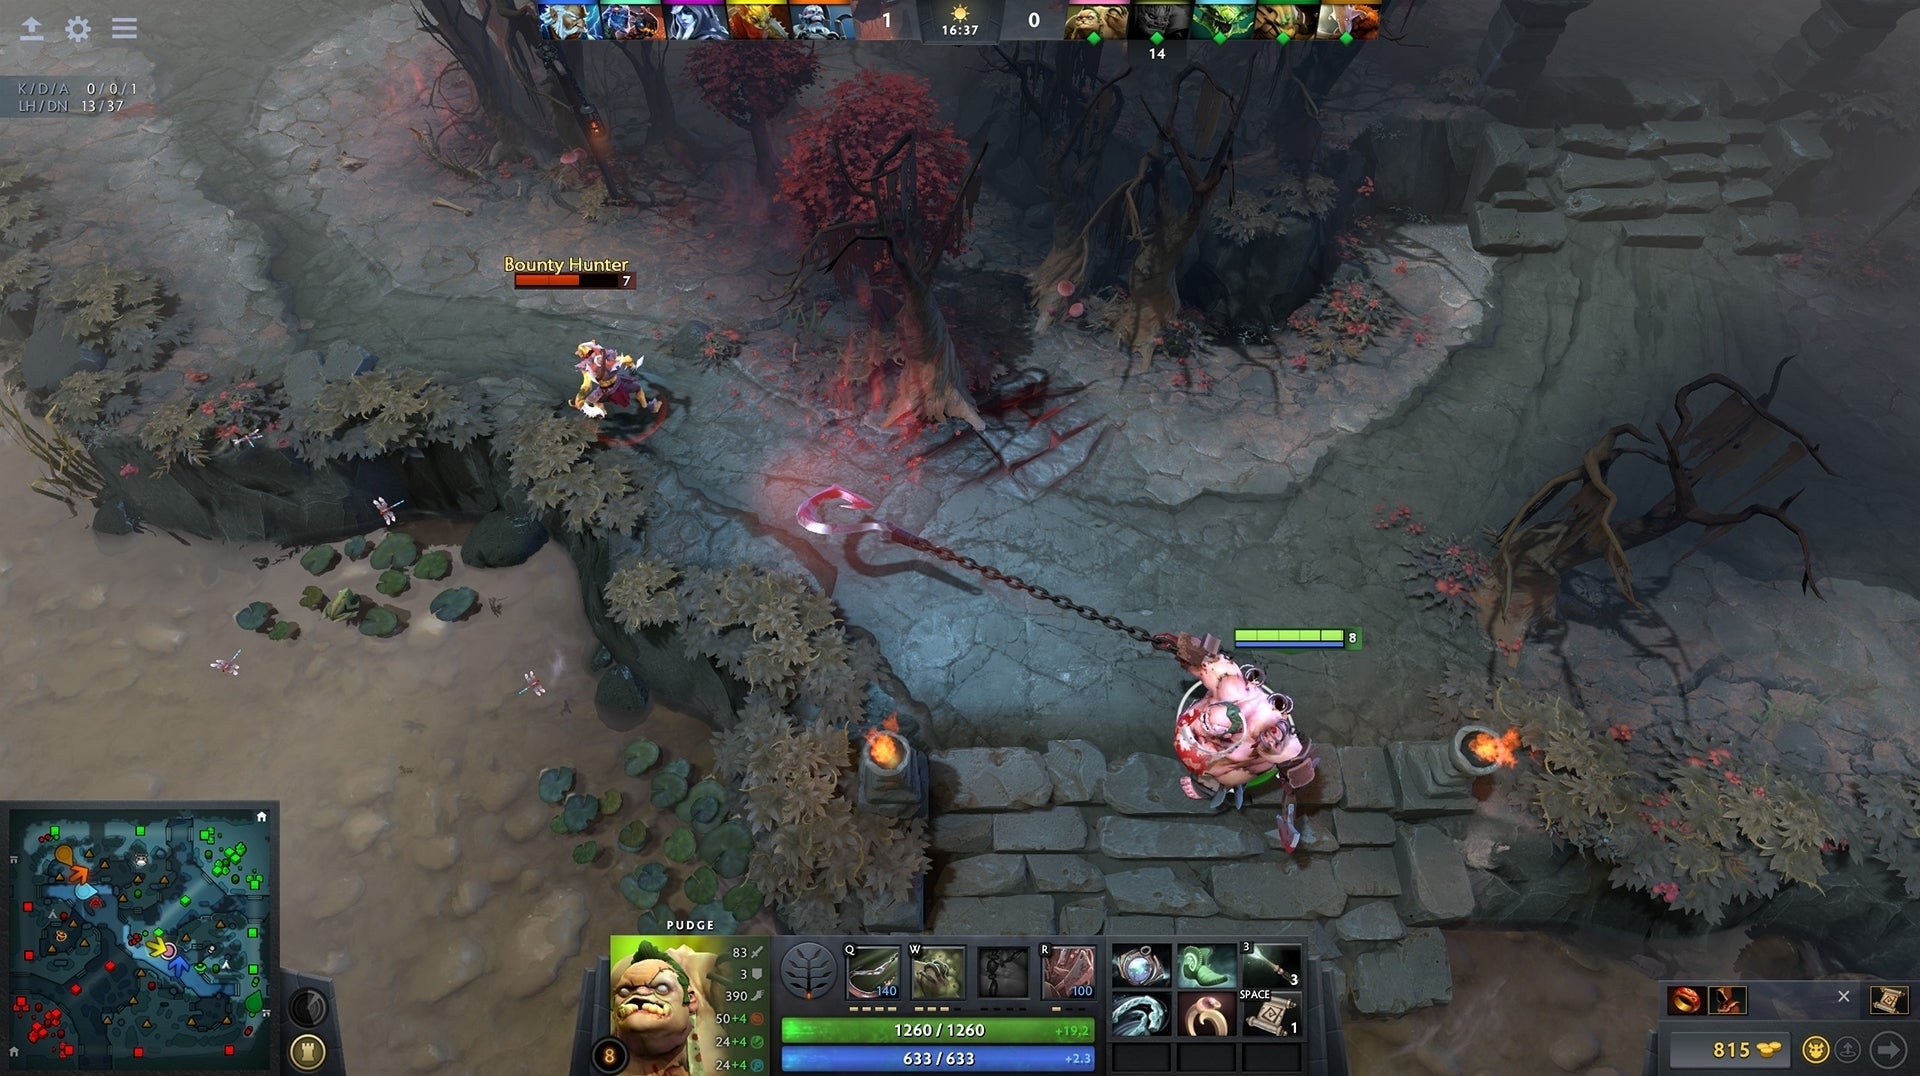 Image for Dota 2 will soon remove support for 32-bit systems, Valve warns